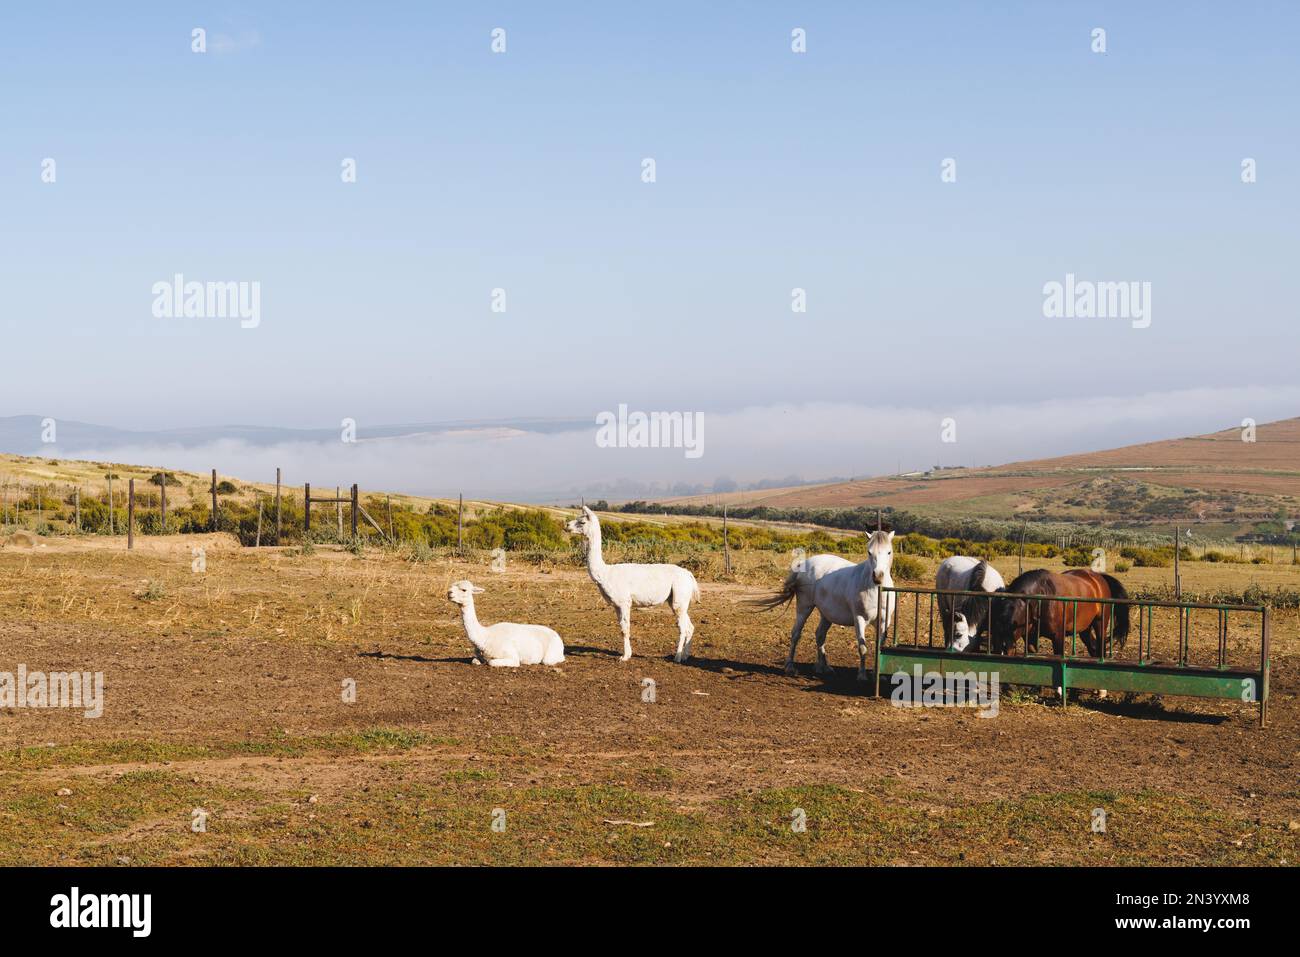 Llamas and horses grazing on grassy landscape against blue sky during sunny day, copy space Stock Photo